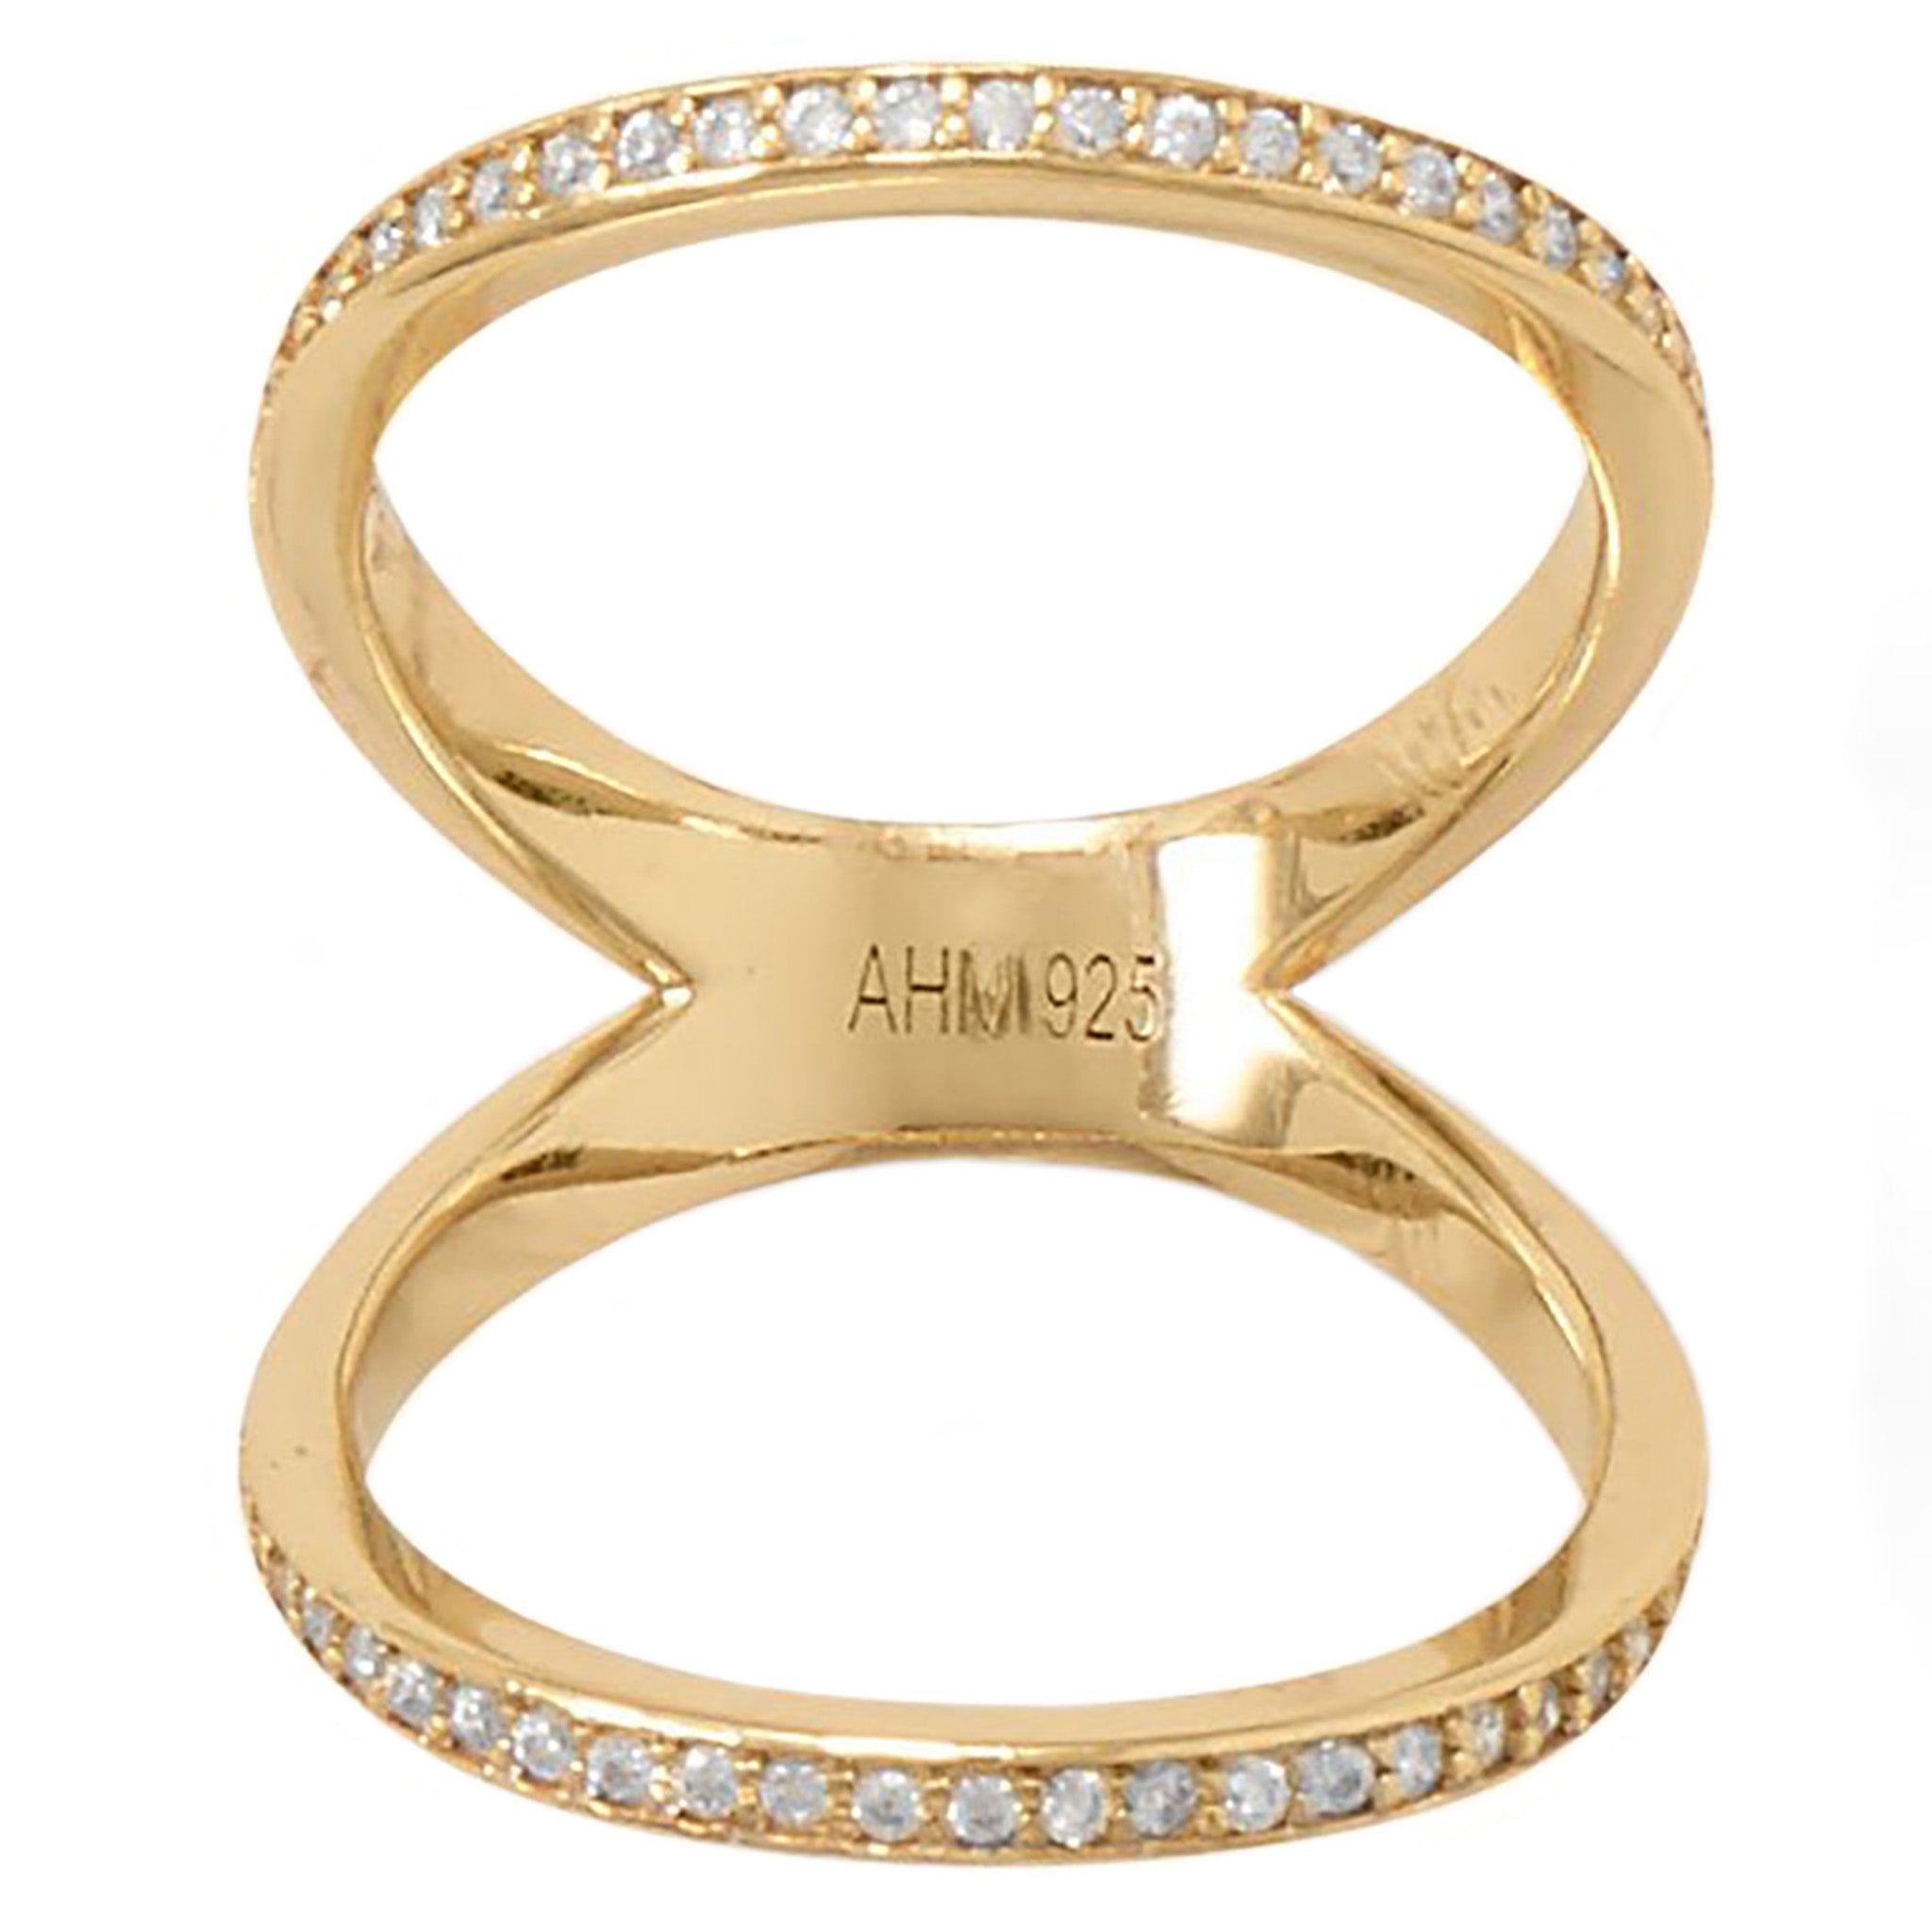 Double Band Zirconia Gold Knuckle Ring